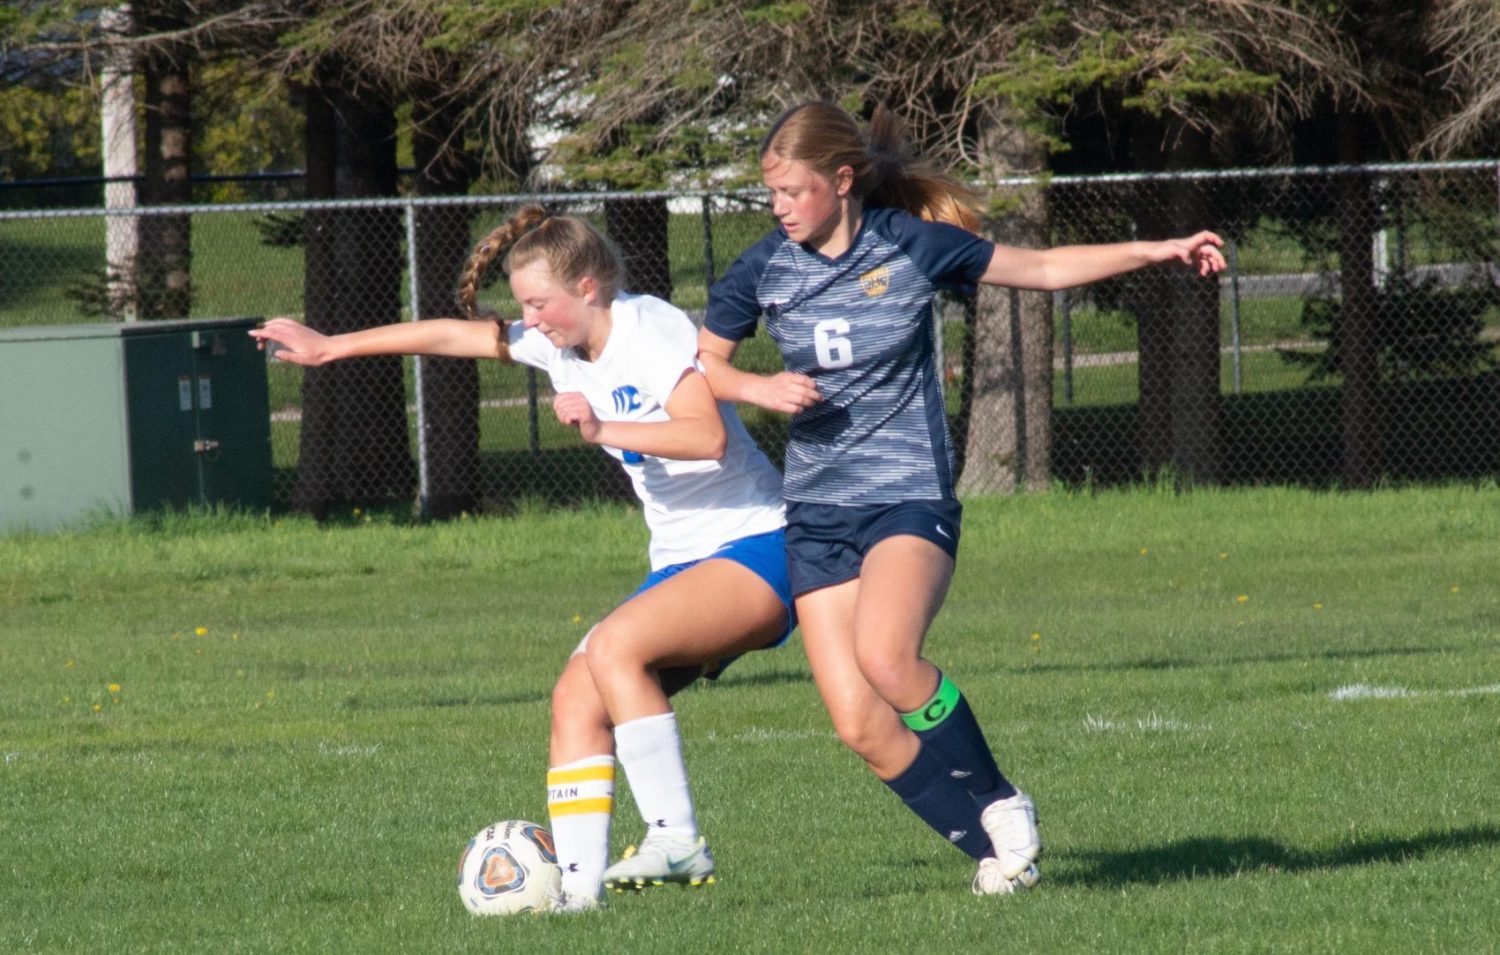 Montague earns 3-1 soccer victory over Manistee